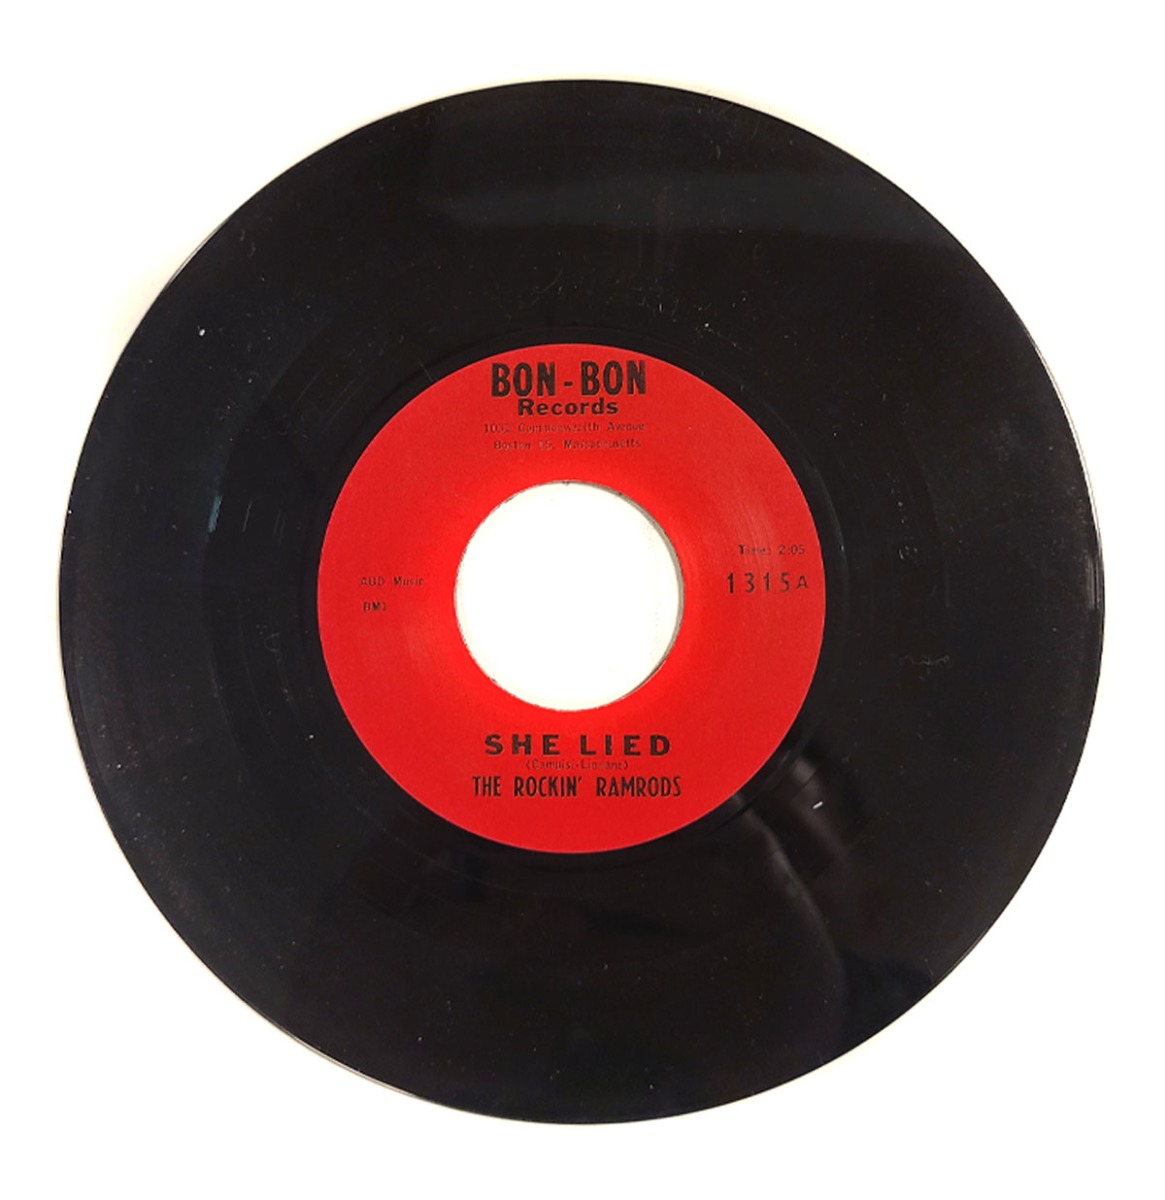 The Rockin' Ramrods: She Lied (Campisi-Linane) / The Girl Can't Help It (Bobby Troupe) Single - Unof